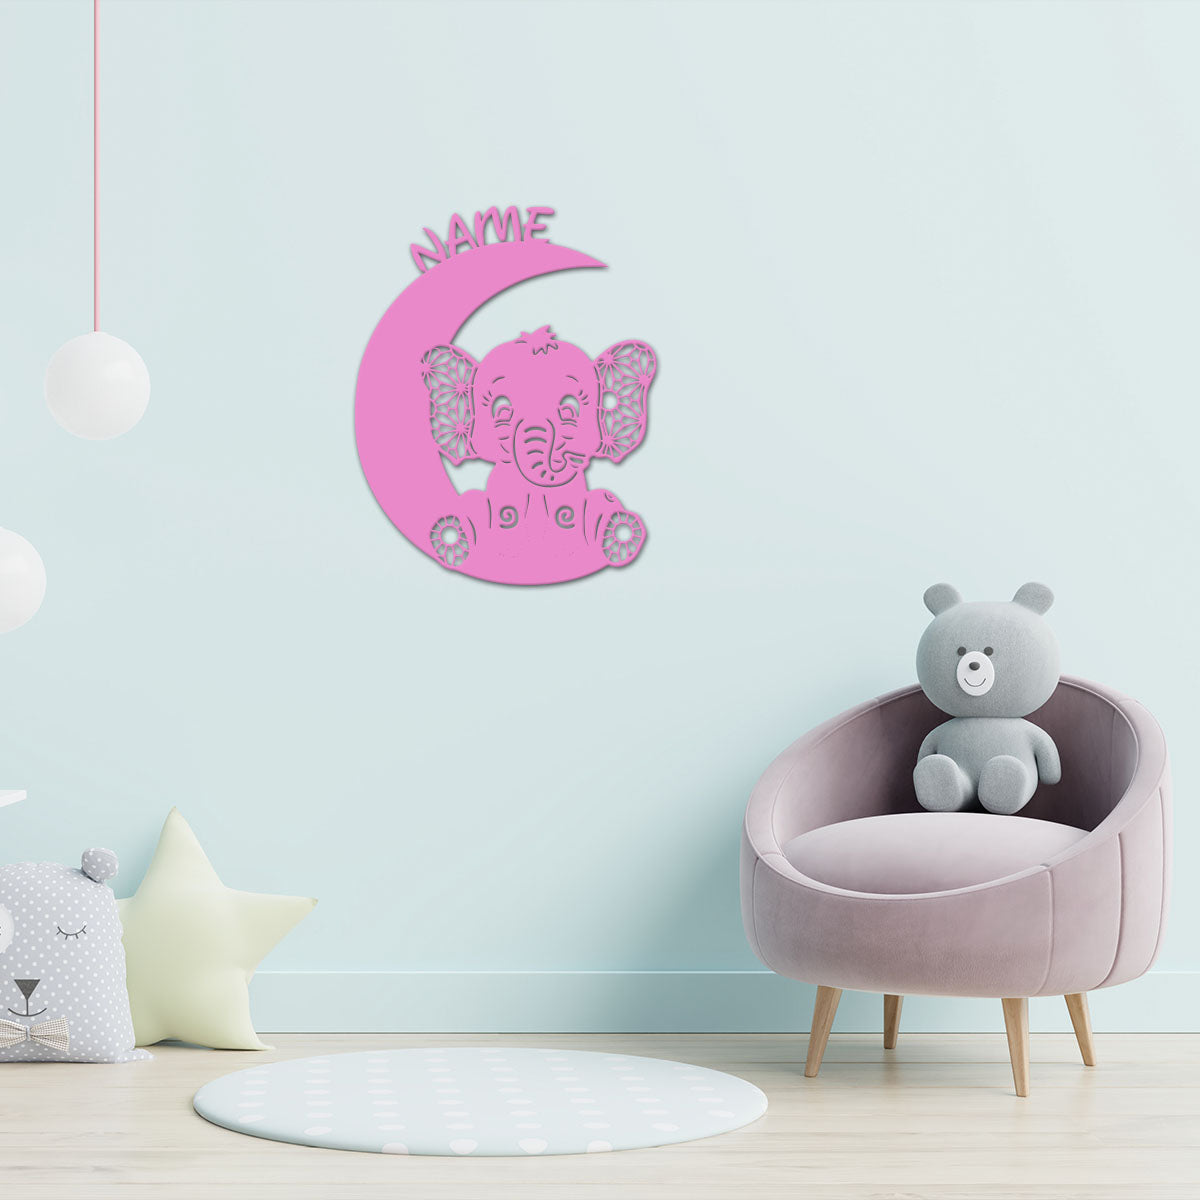 Newborn Gift – Personalized Wall Decor with optional LED Light | Starting from: